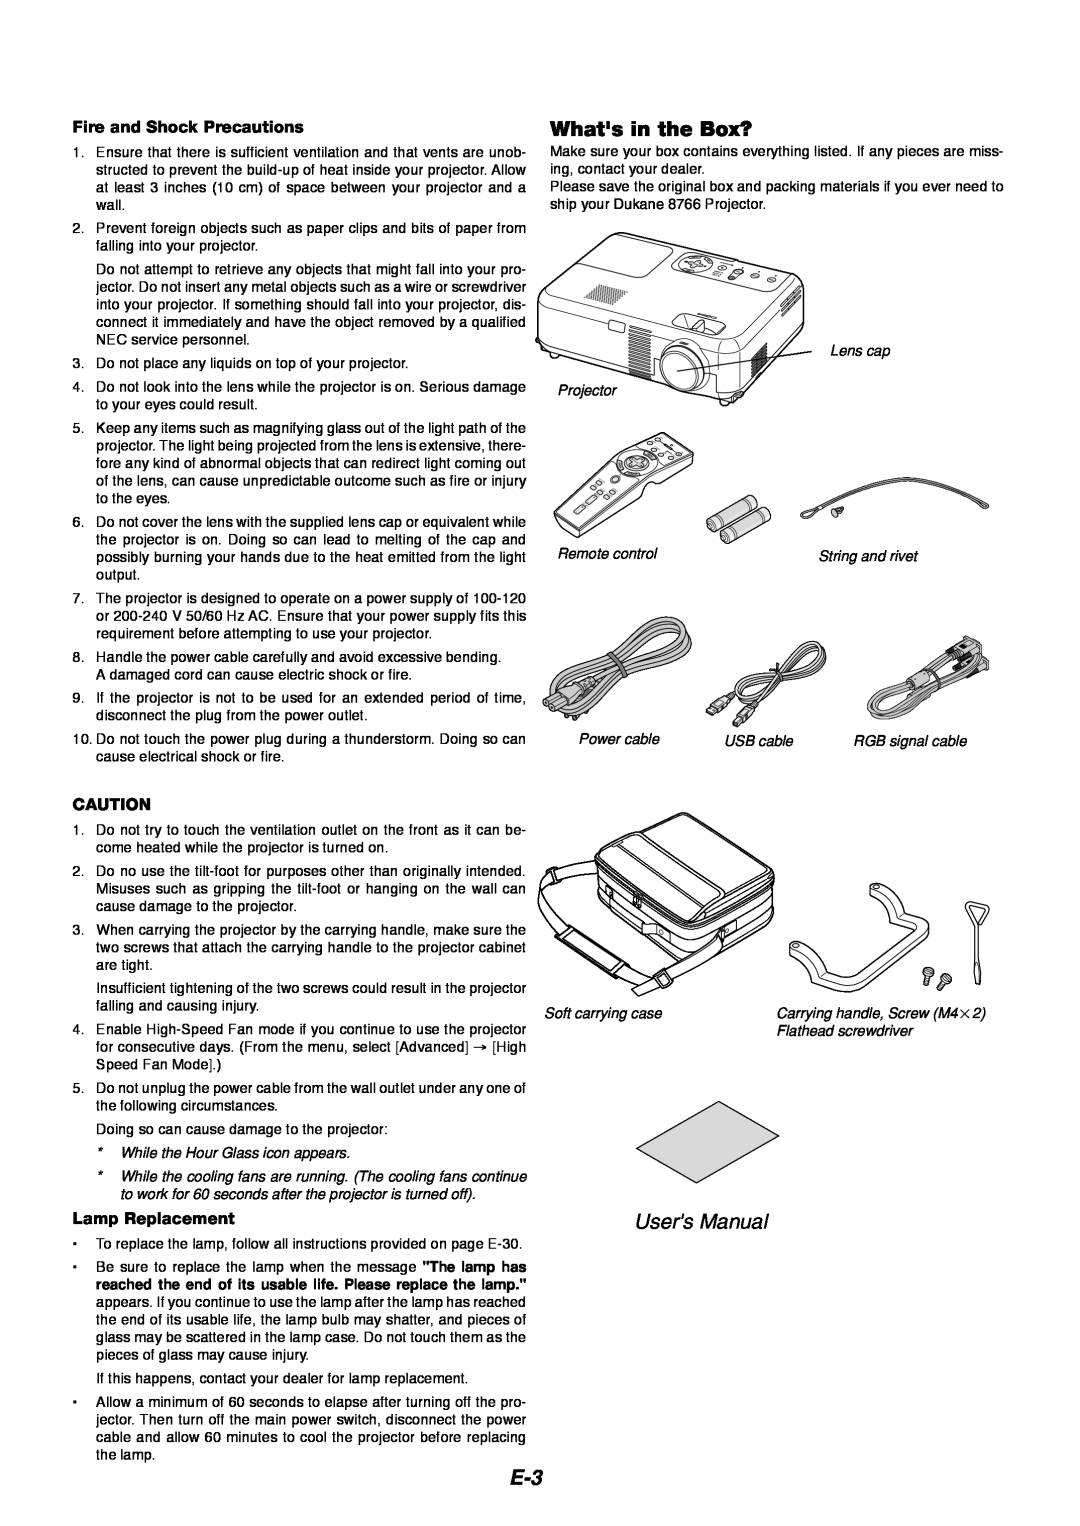 Dukane 8766 manual Whats in the Box?, Users Manual, Fire and Shock Precautions, Lamp Replacement 